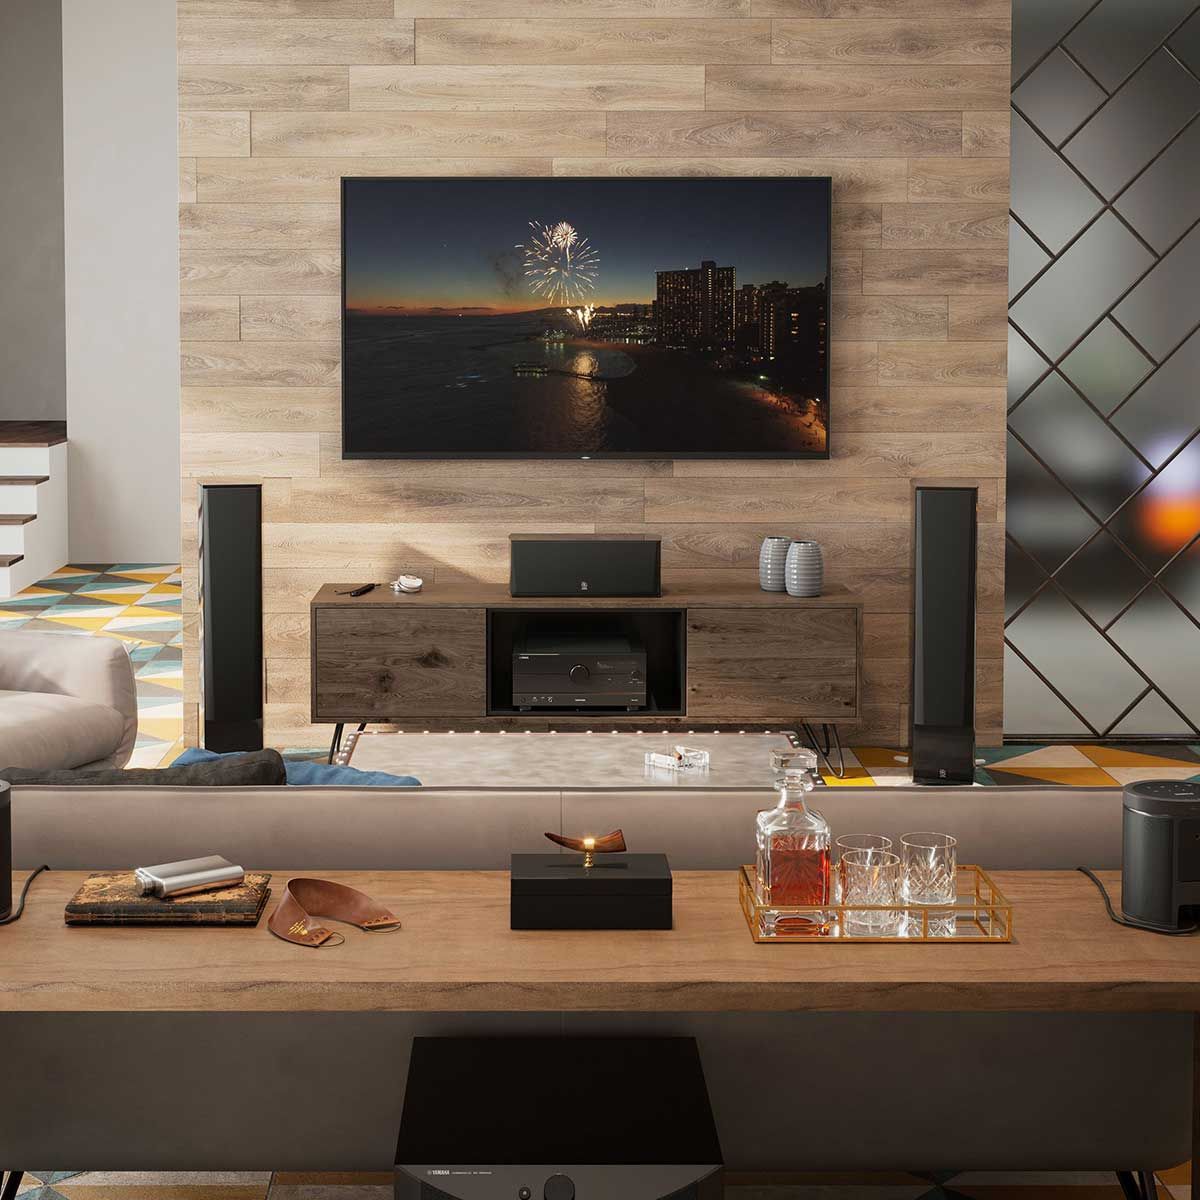 Yamaha Aventage RX-A4A 7.2-Channel A/V Receiver, Black, on a wood media console in a warmly-lit living space, with a home theater setup